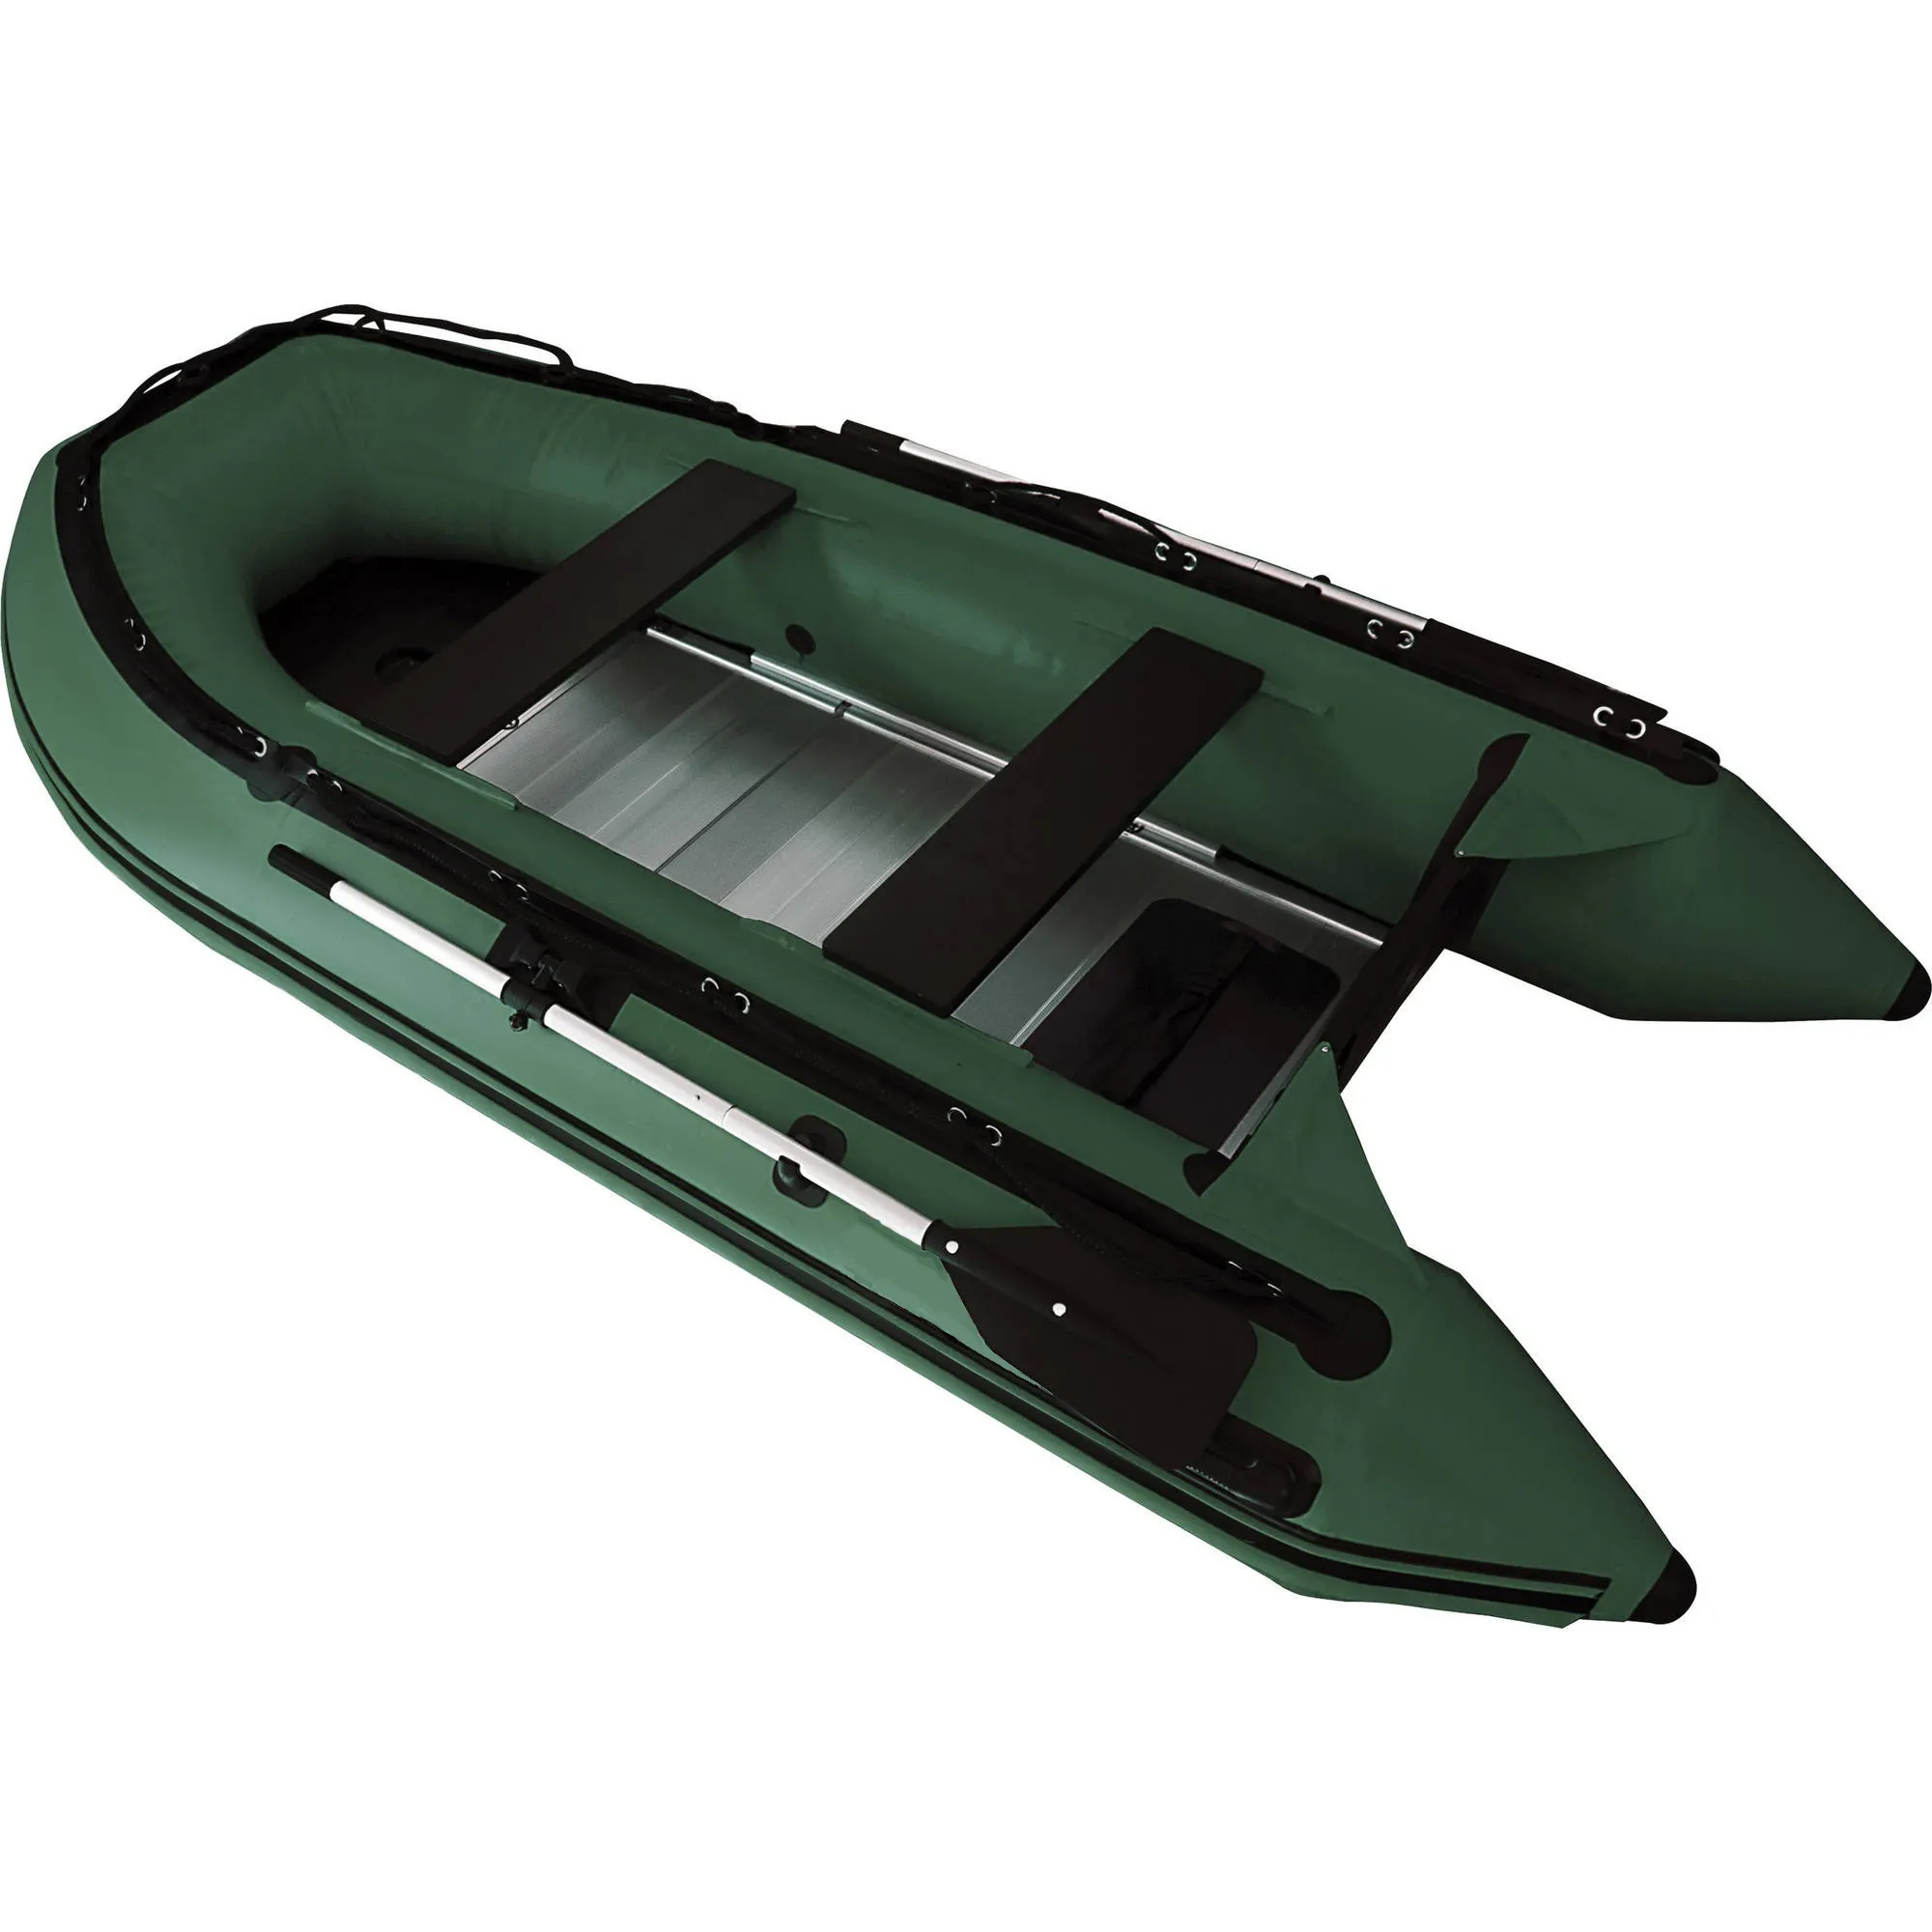 360cm Inflatable Aluminum Floor Foldable Inflatable Boats